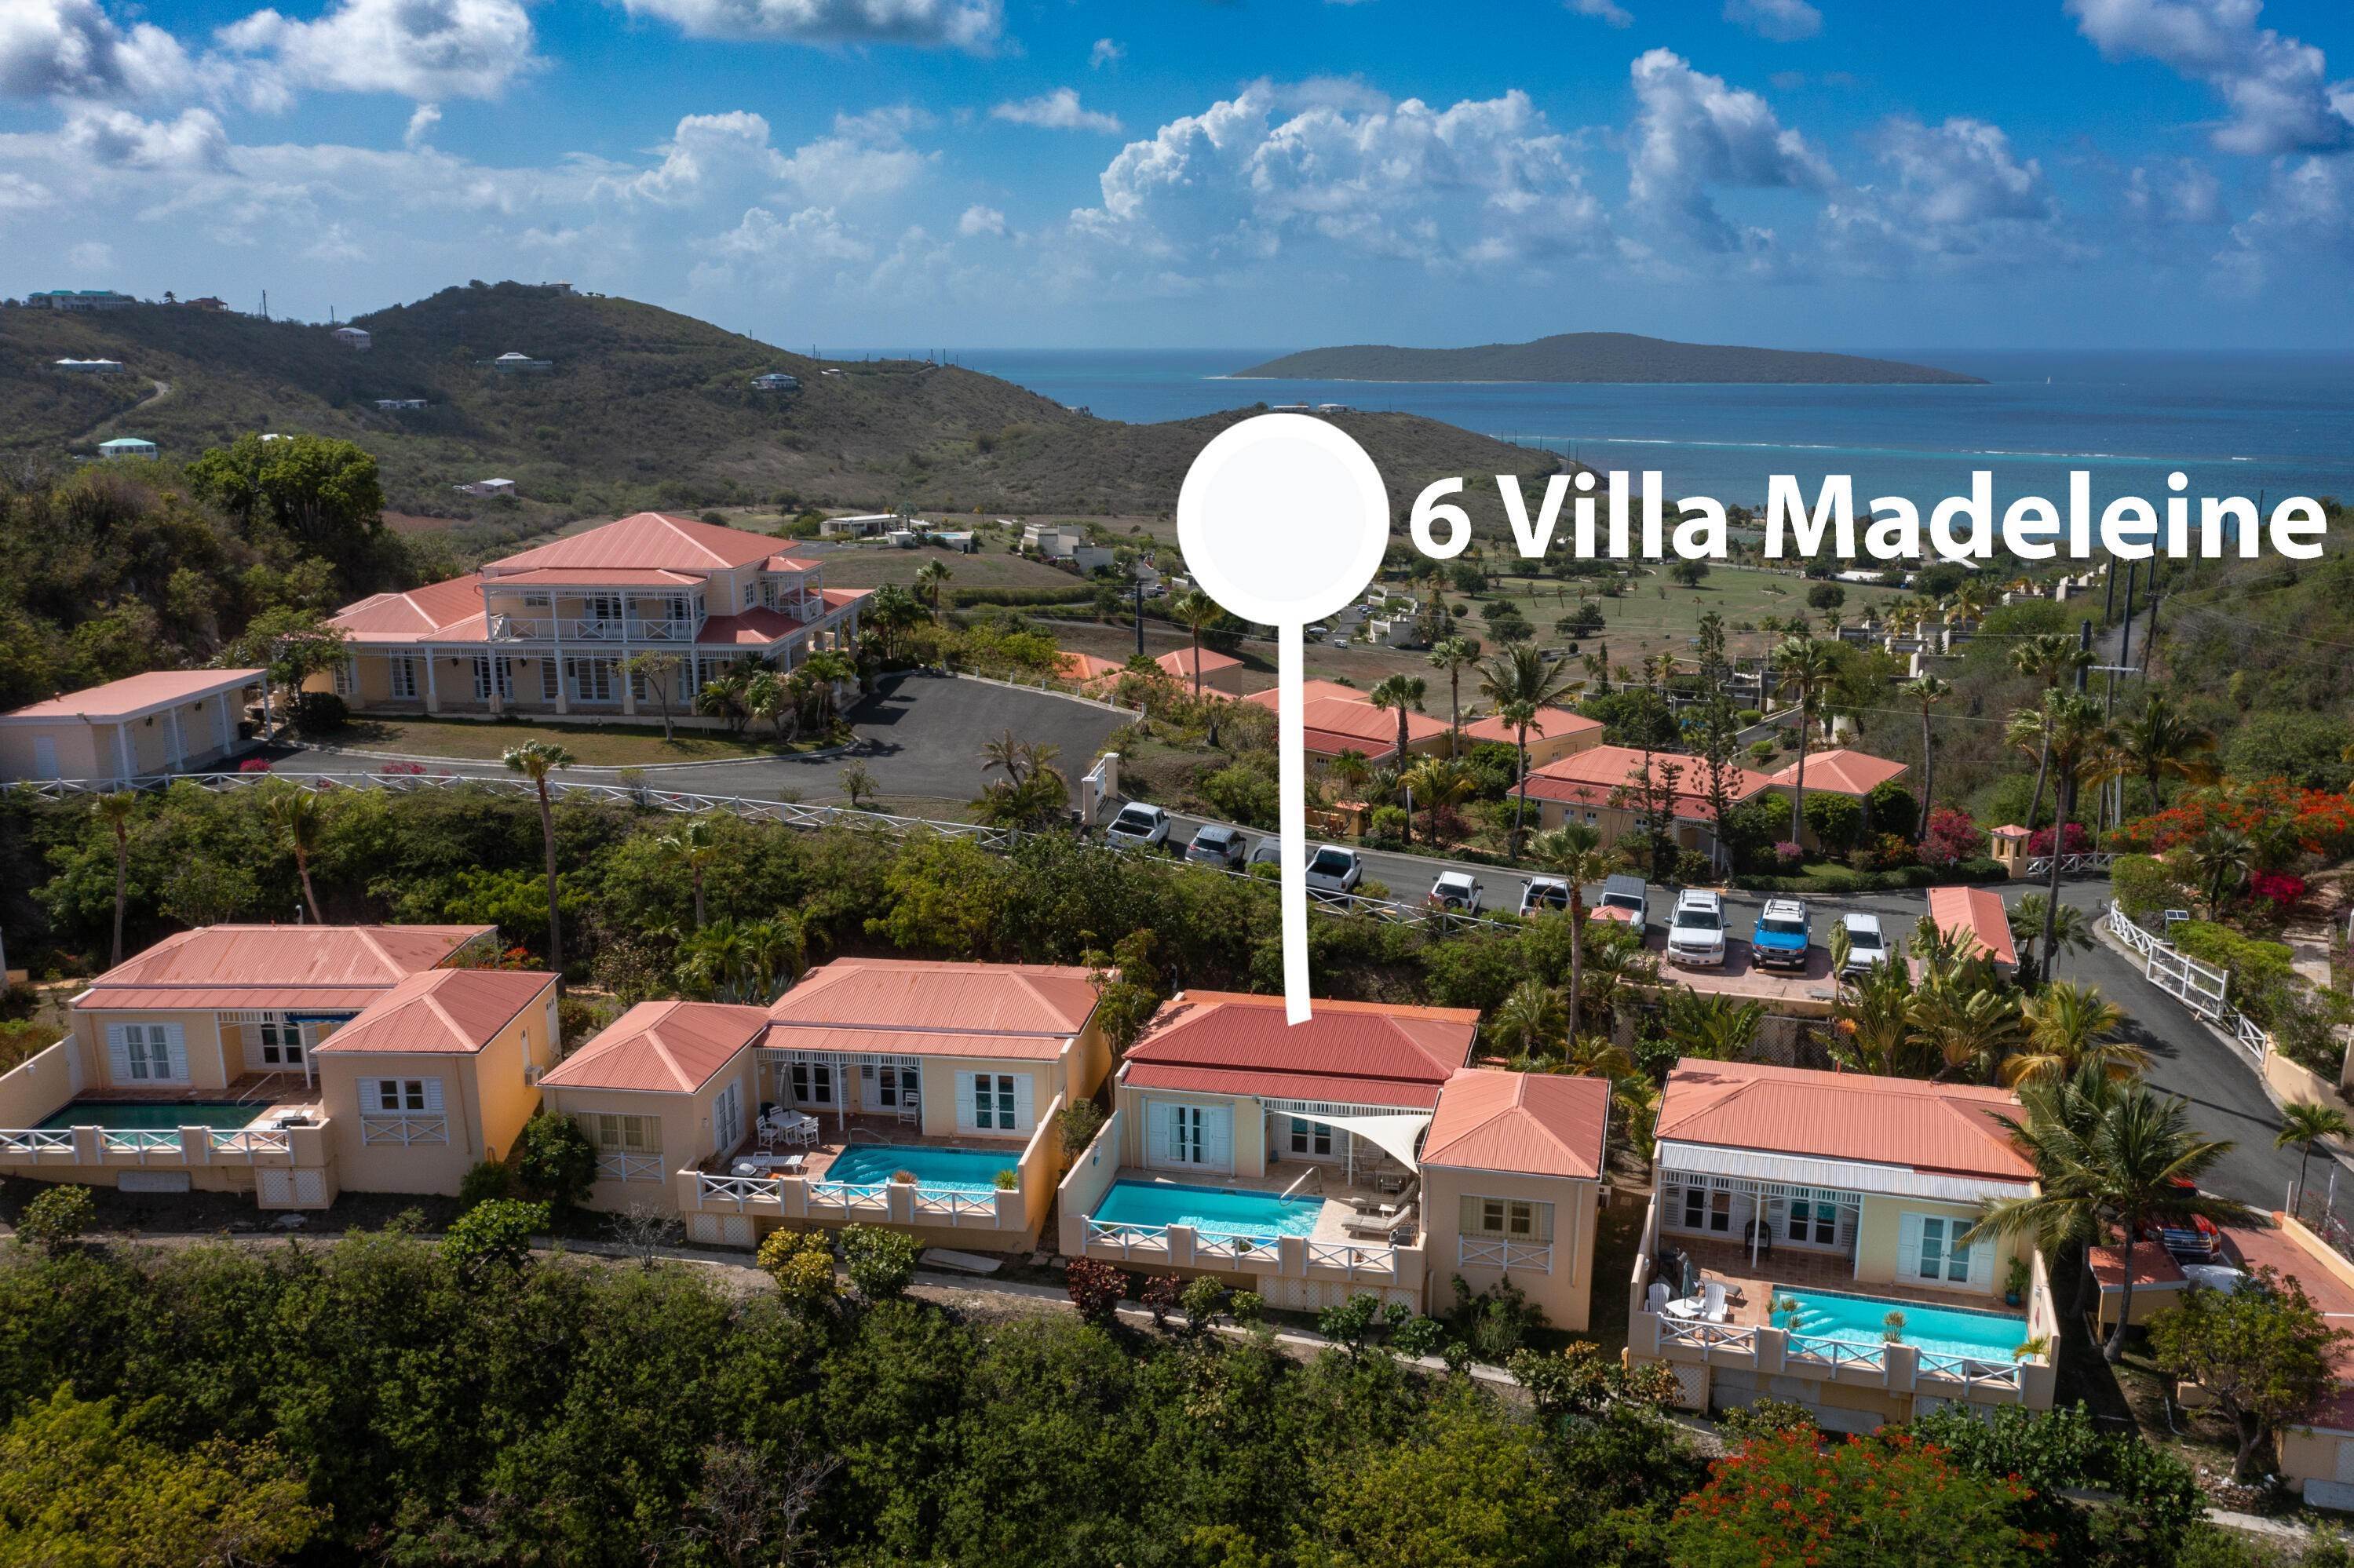 18. Condominiums for Sale at 6 Teagues Bay EB St Croix, Virgin Islands 00820 United States Virgin Islands